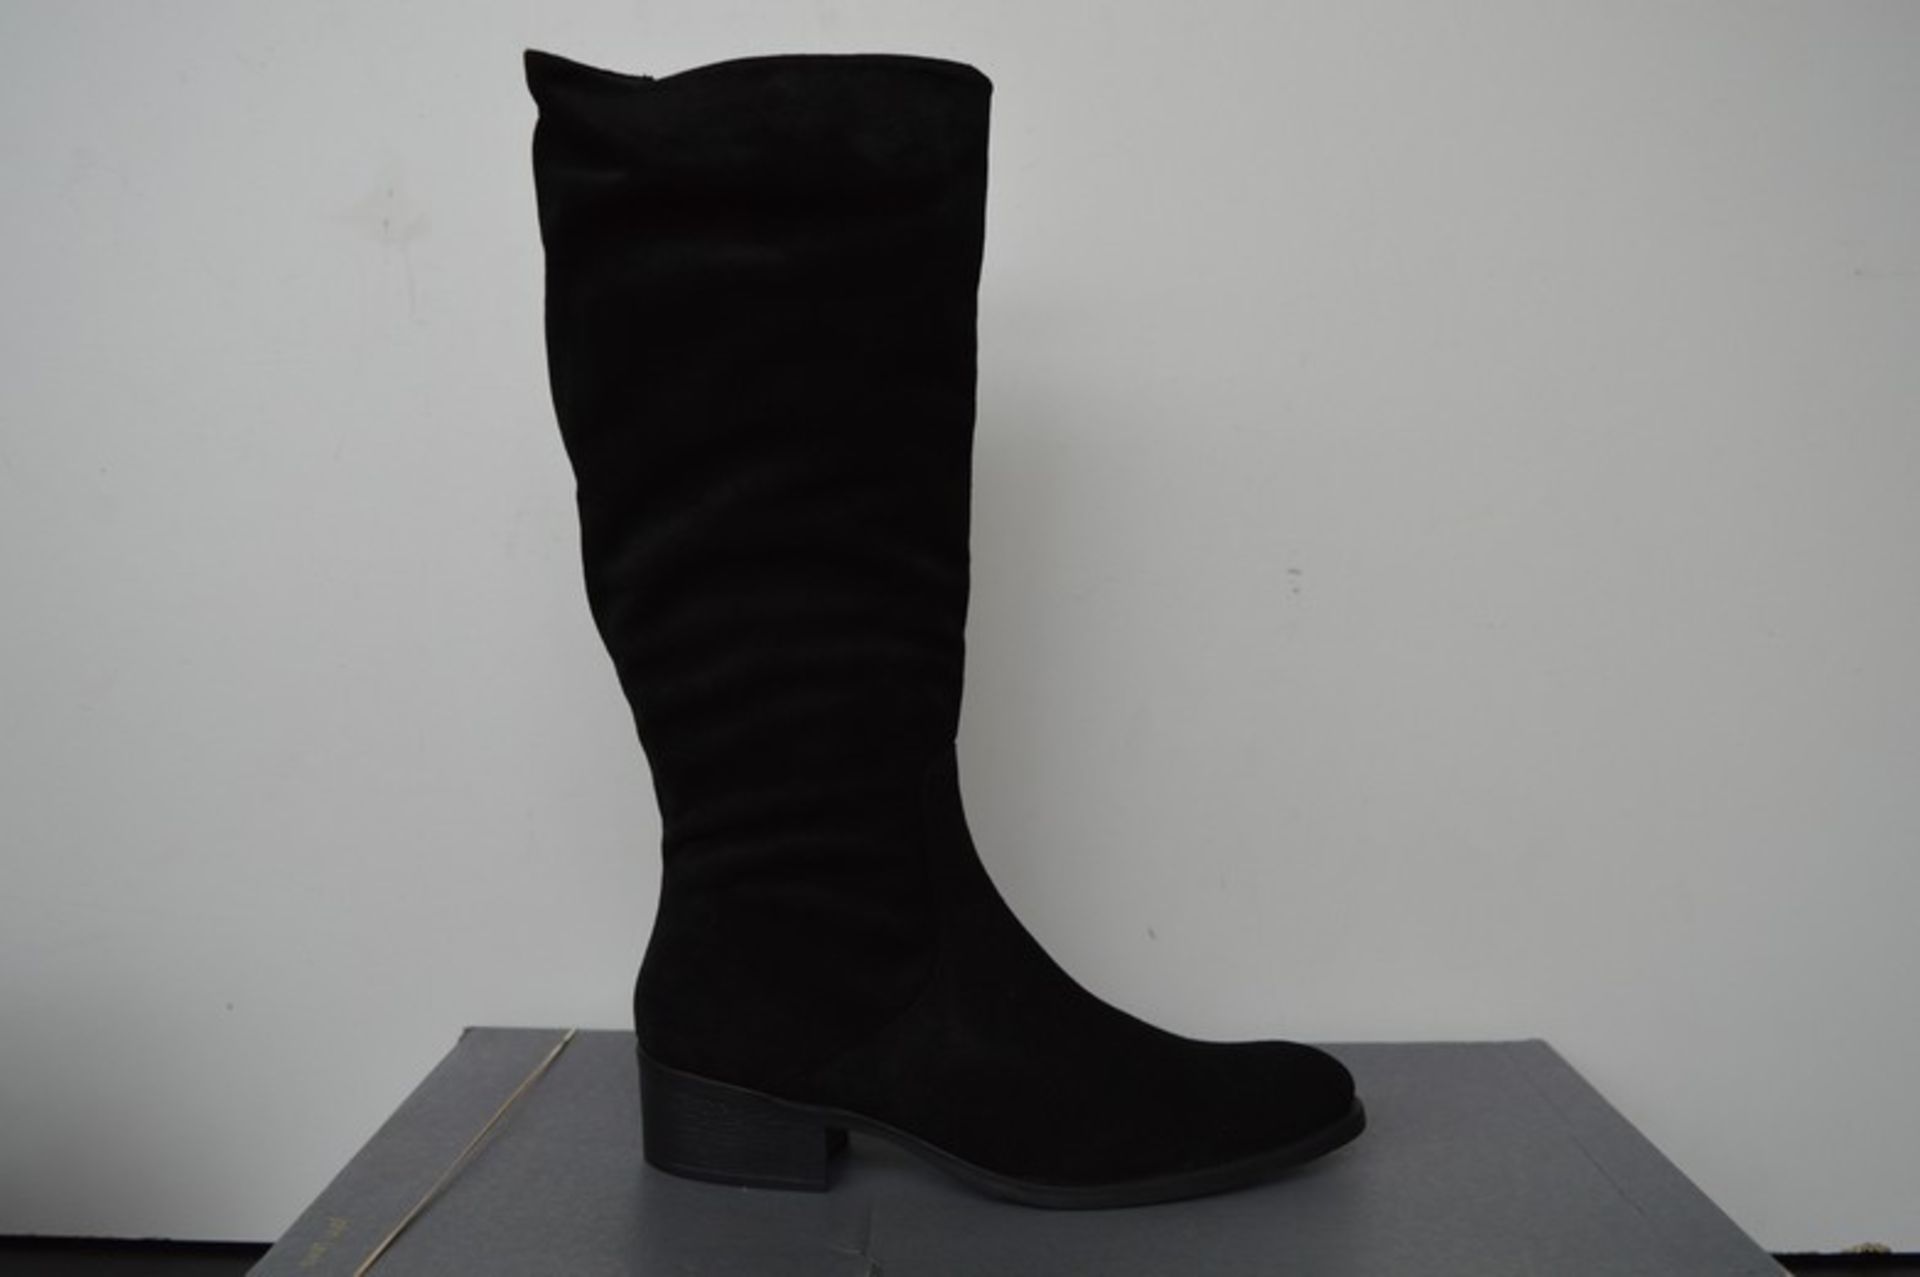 BOXED BRAND NEW JOHN ELWIS BLACK SUEDE TIROL LADIES KNEE HIGH BOOTS SIZE 8 RRP £150 (DSCLIP)(26.03.